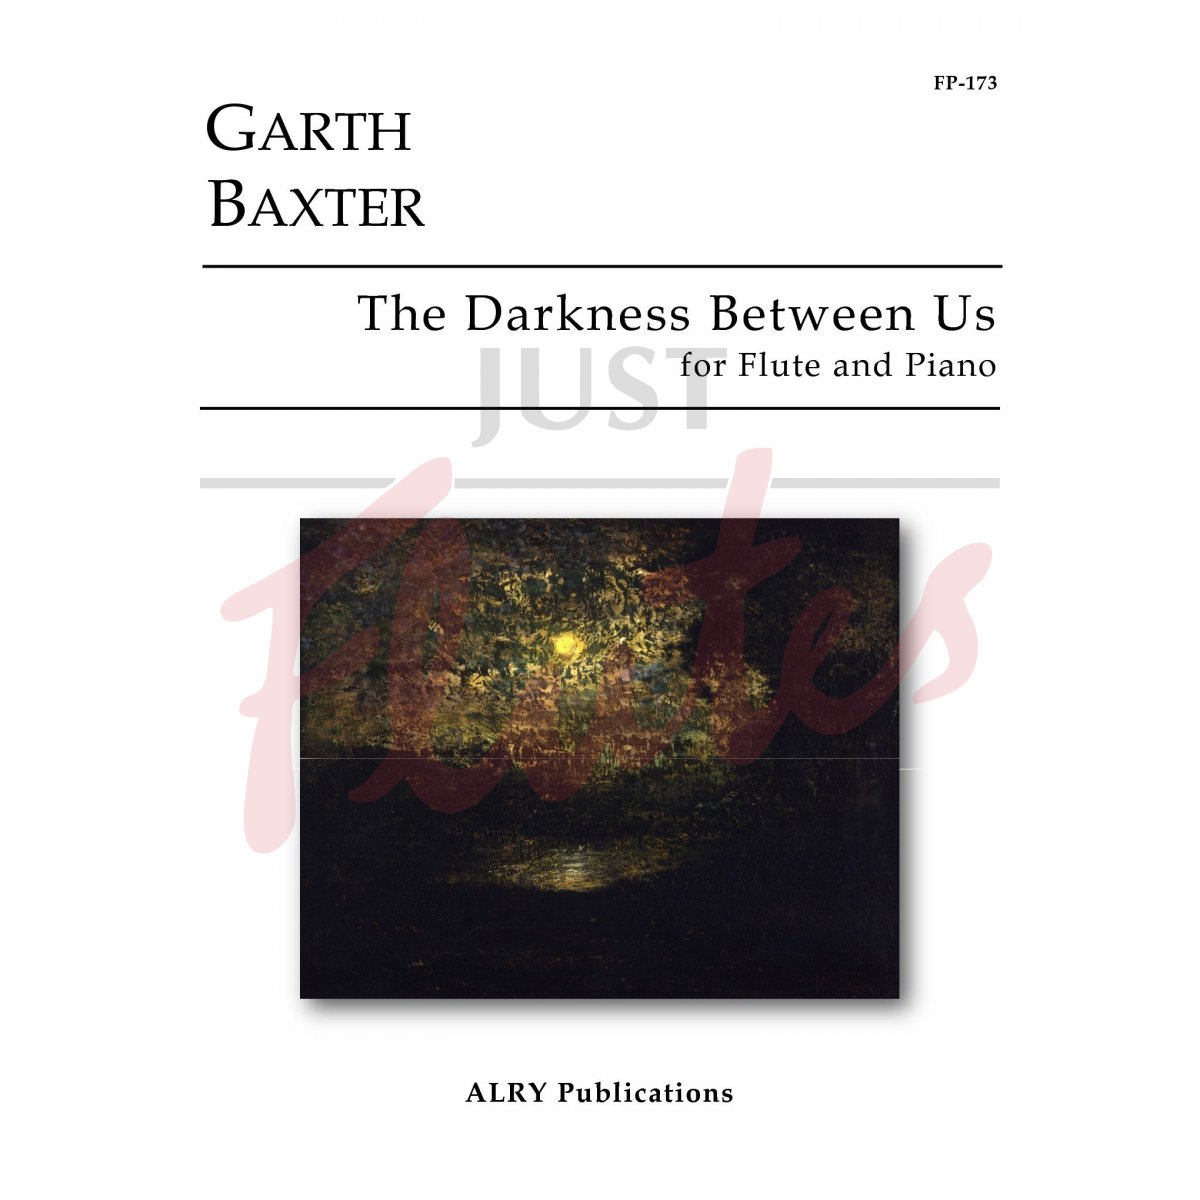 The Darkness Between Us for Flute and Piano